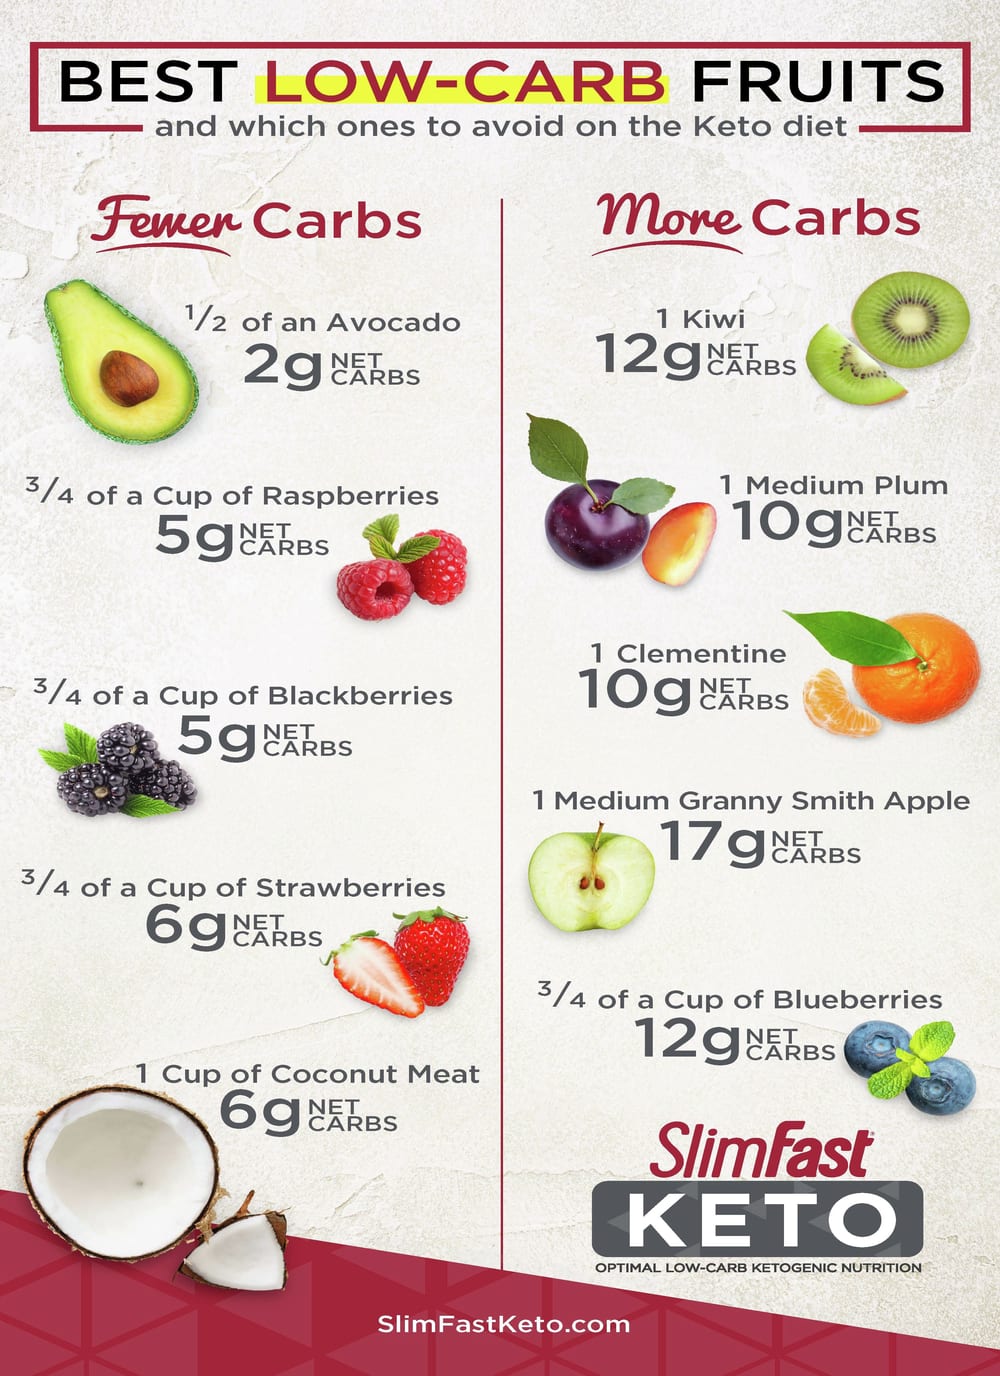 Keto dieters’ fruit guide – List of 5 fruits with 6g or less of net carbs and 5 fruits with 17g or less of net carbs.